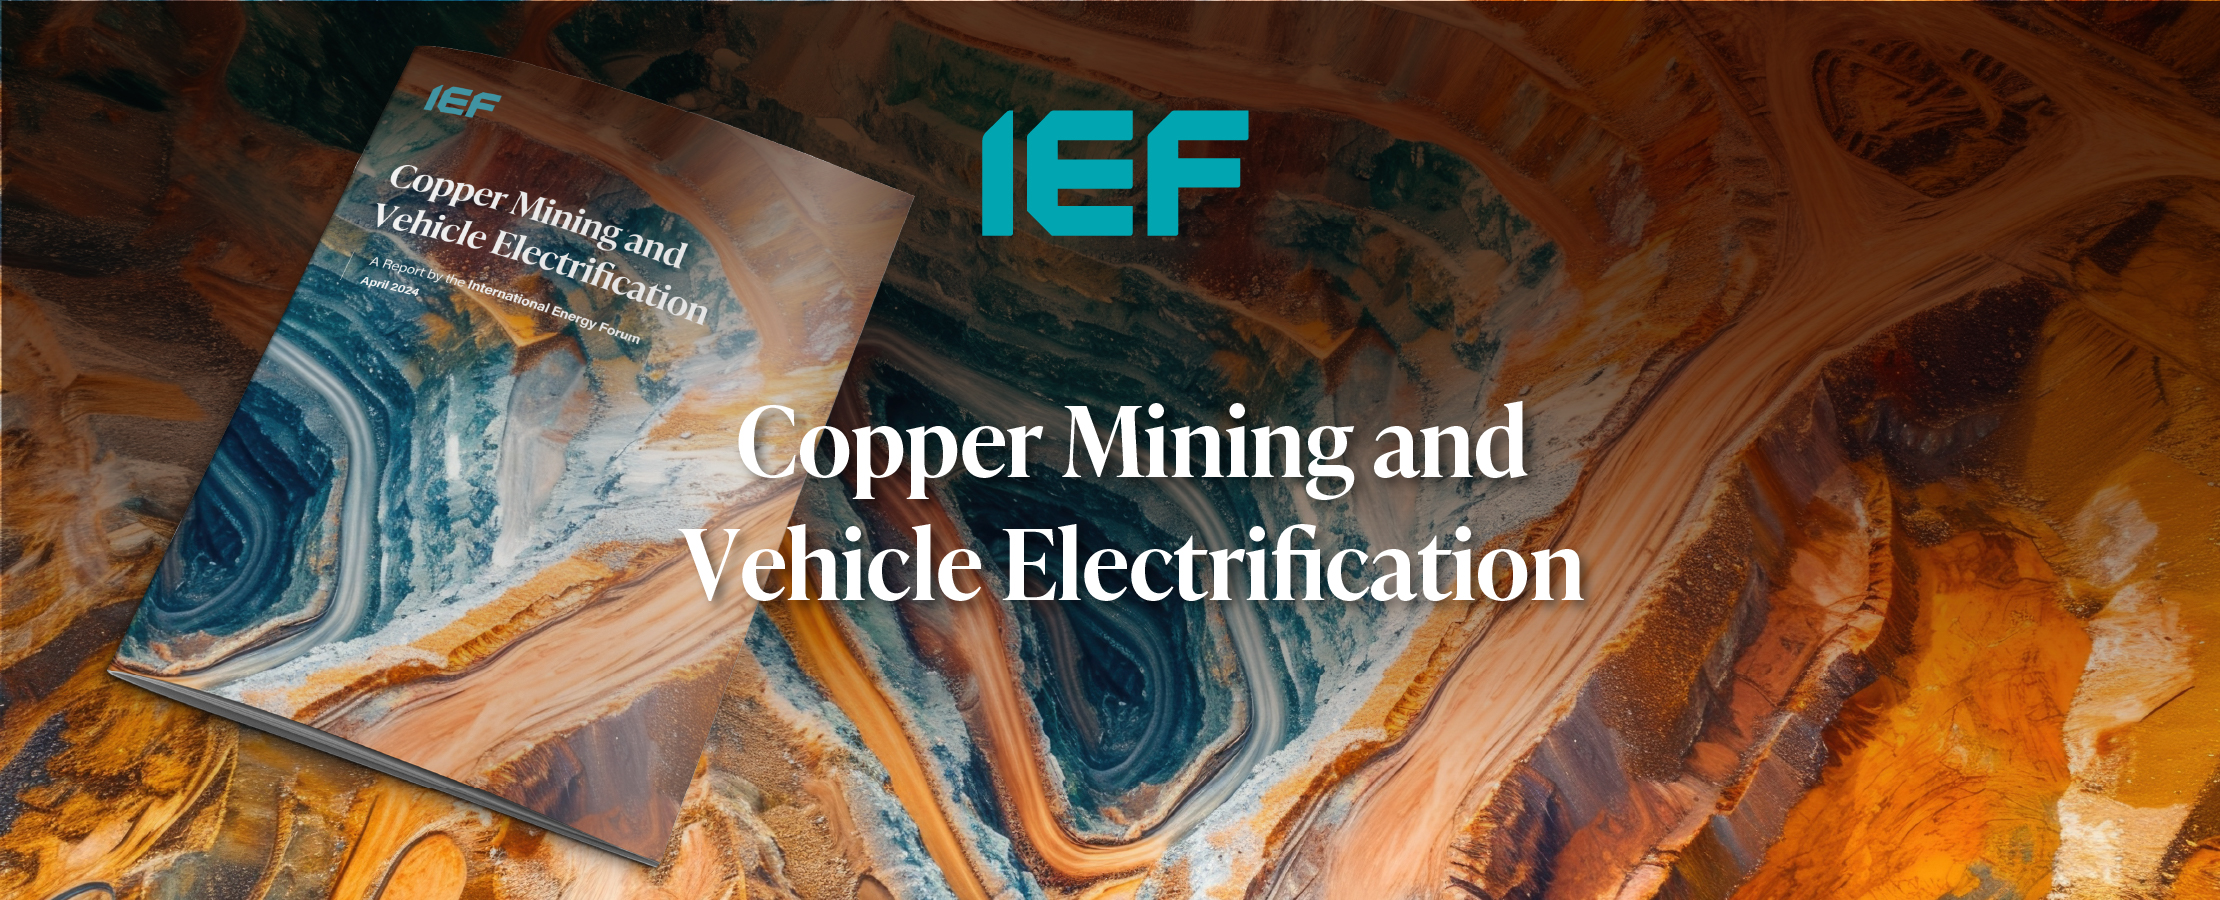 Copper Mining and Vehicle Electrification